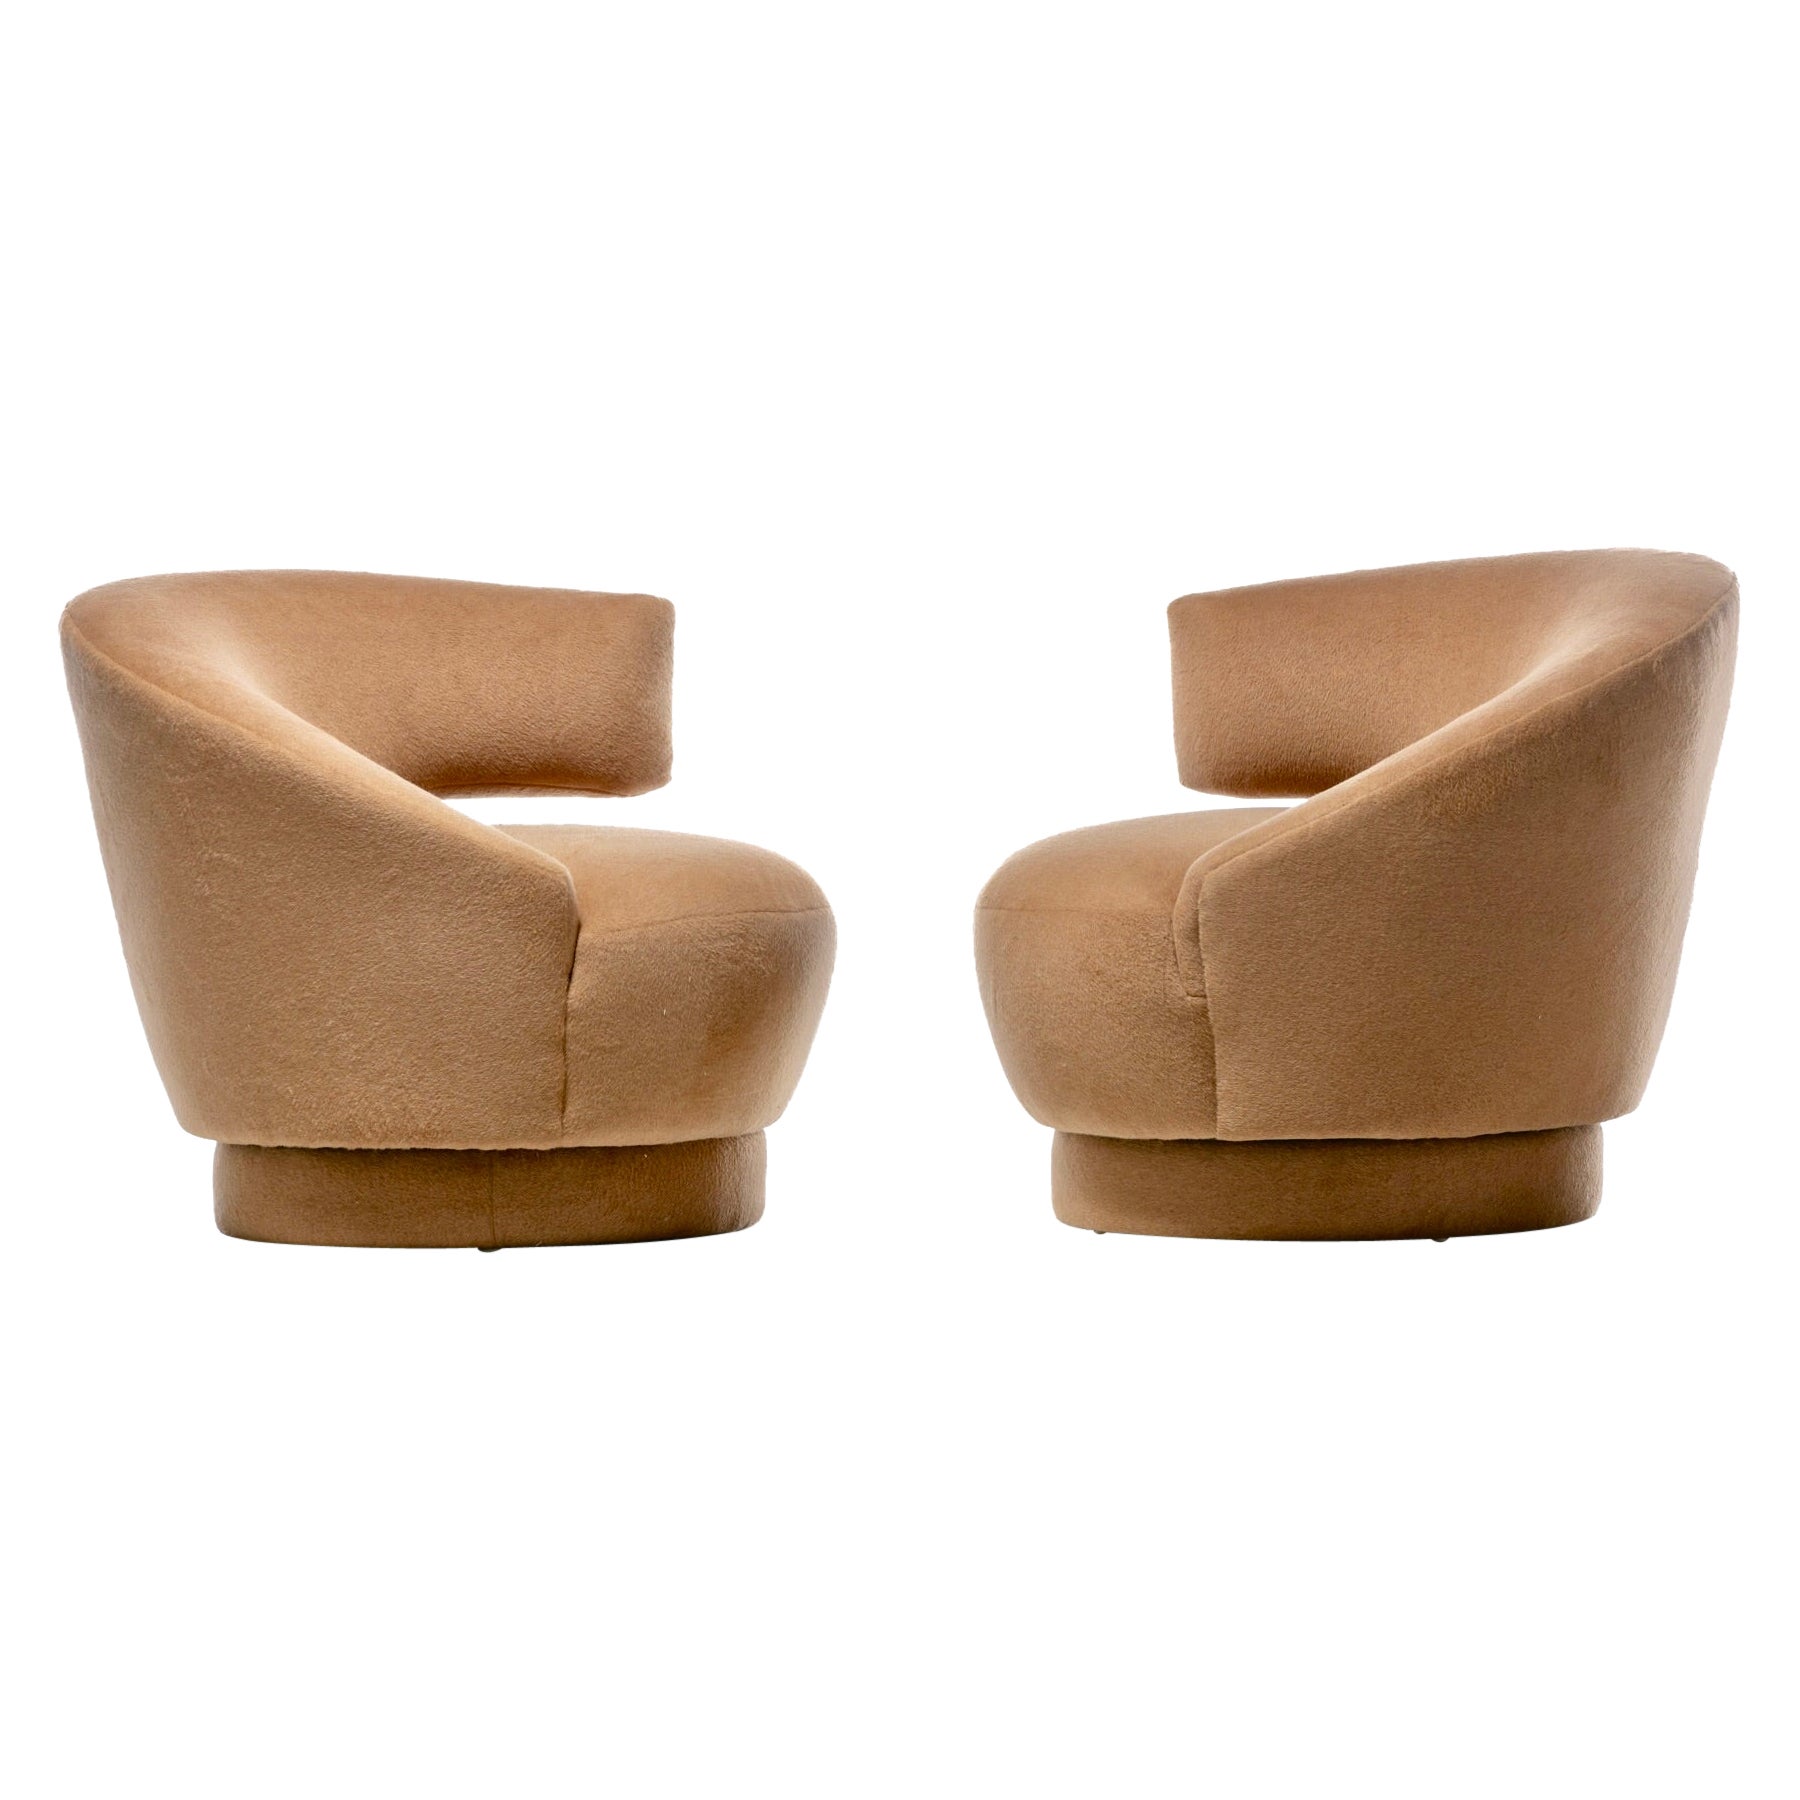 Vladimir Kagan Caterpillar Chairs Newly Upholstered in Camel Color Mohair For Sale